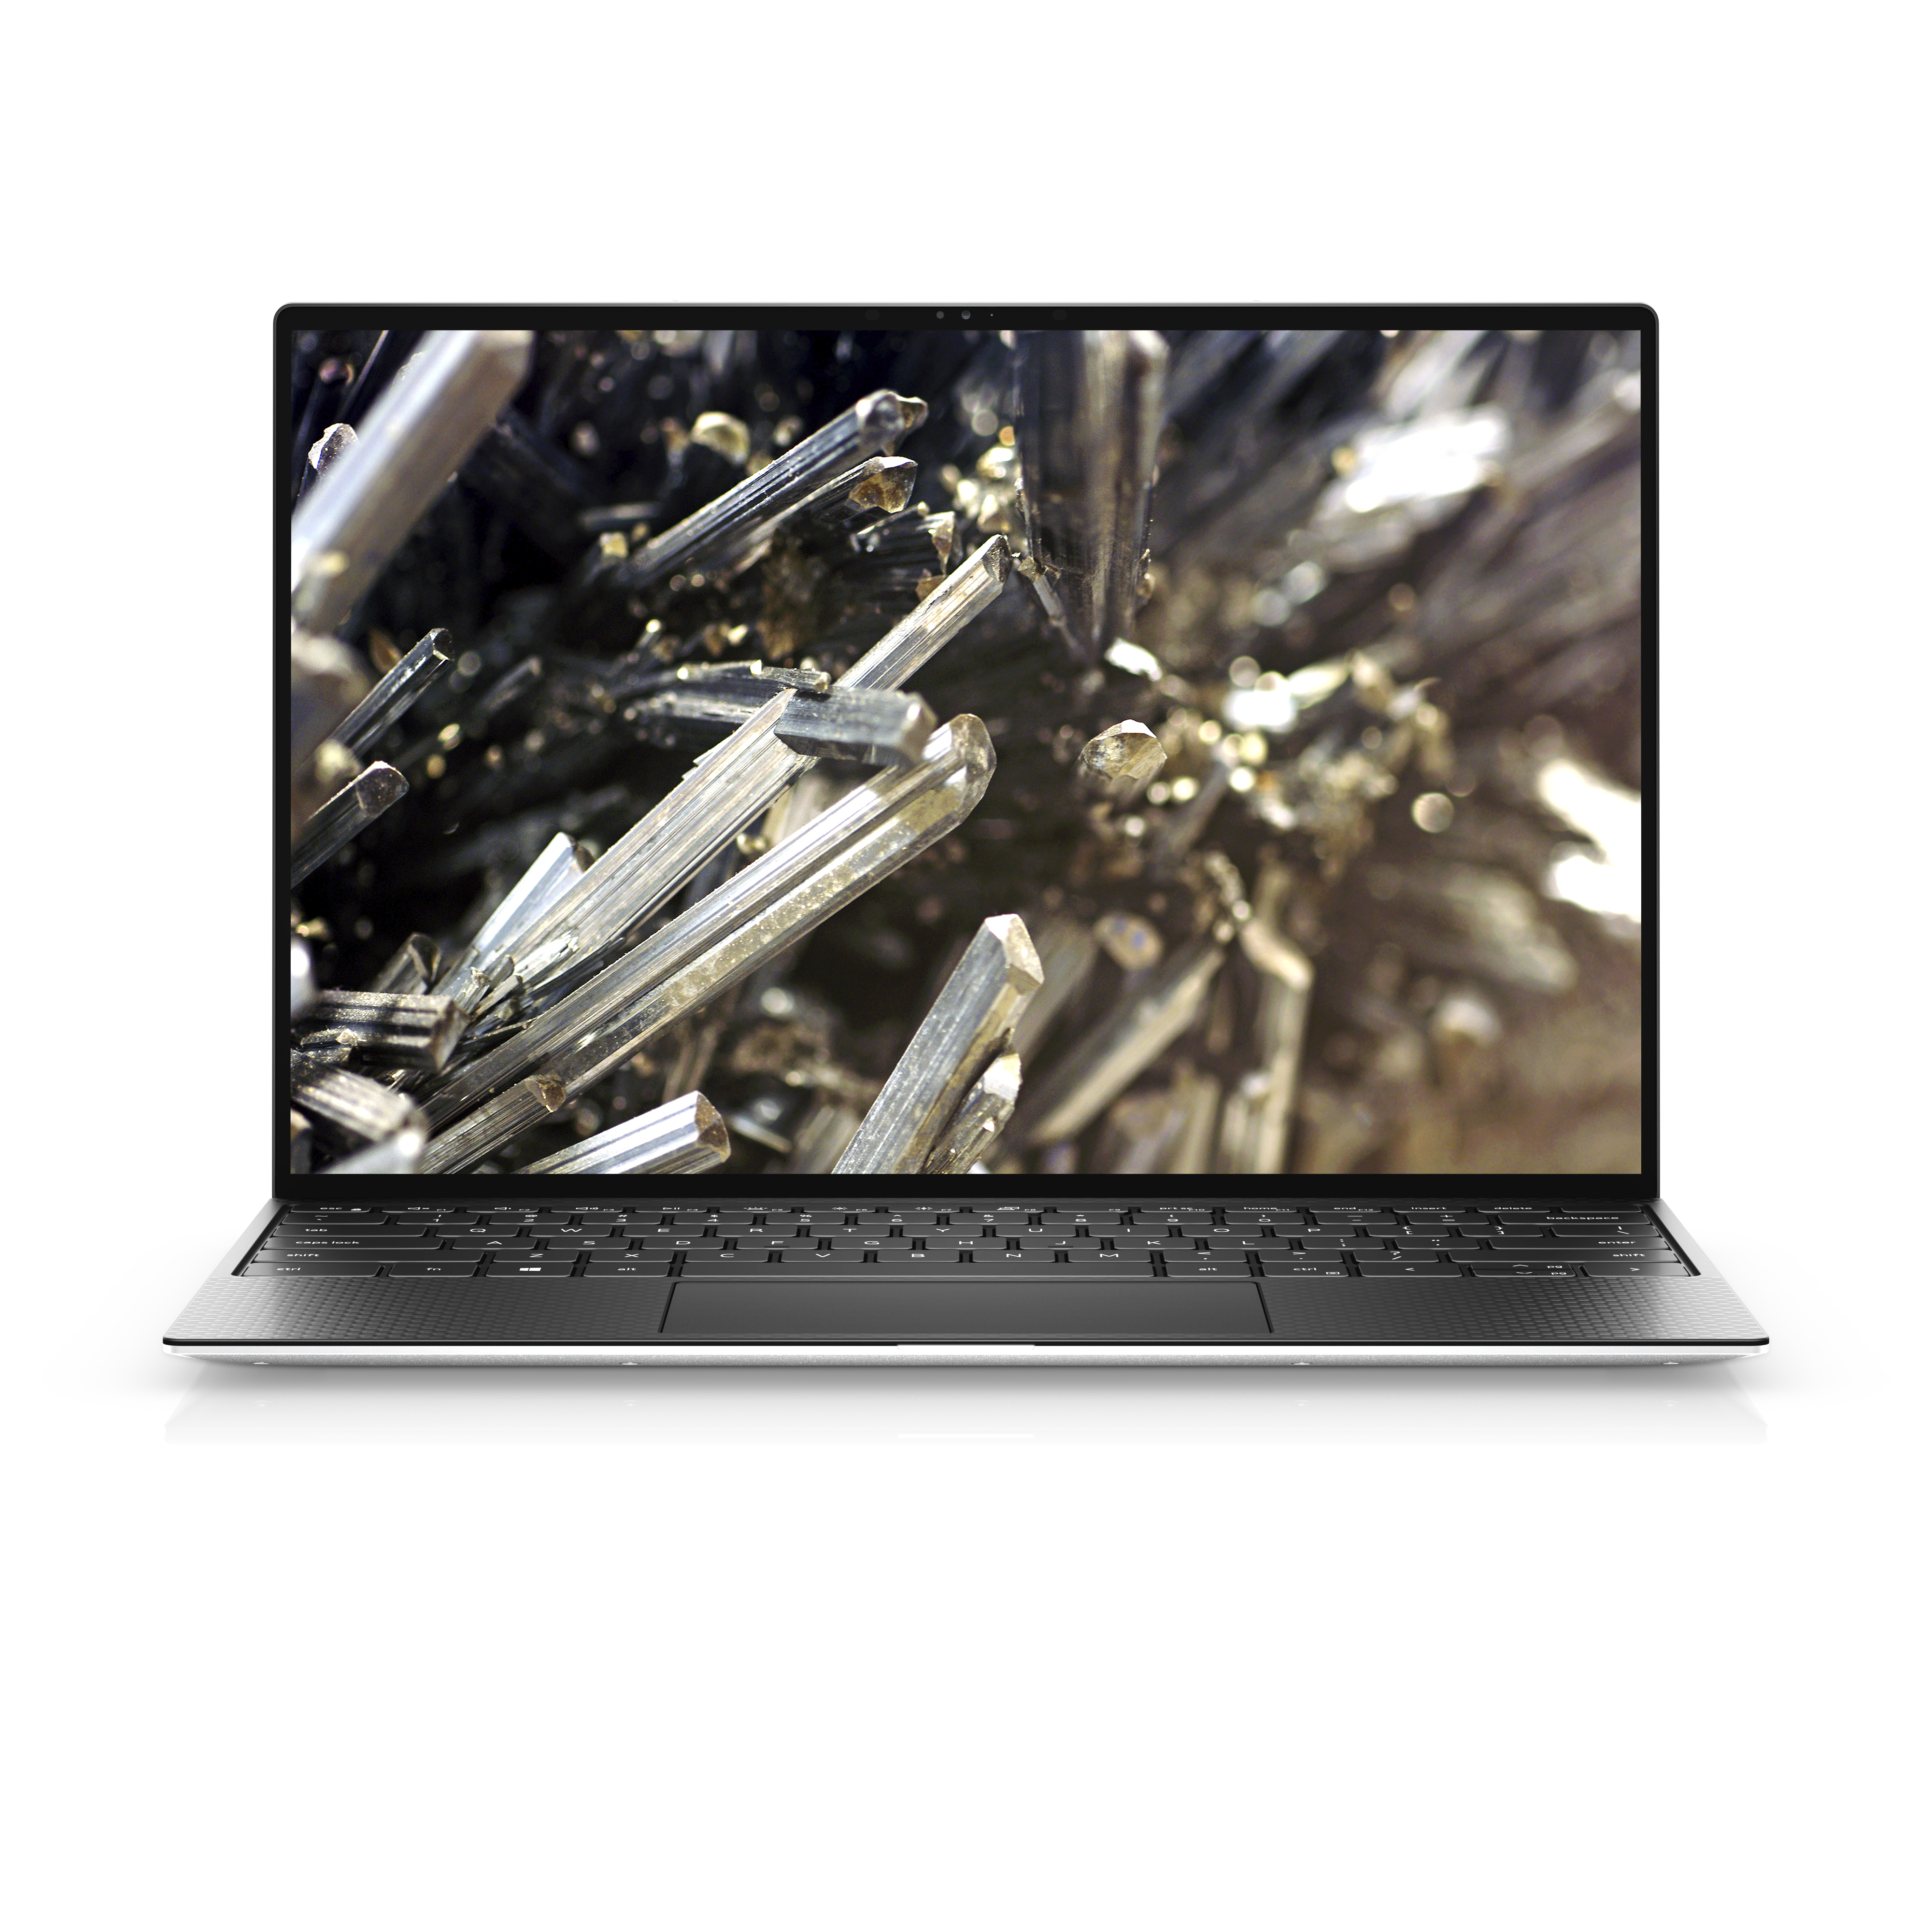 Photo of the XPS 13 9300,open and facing the viewer